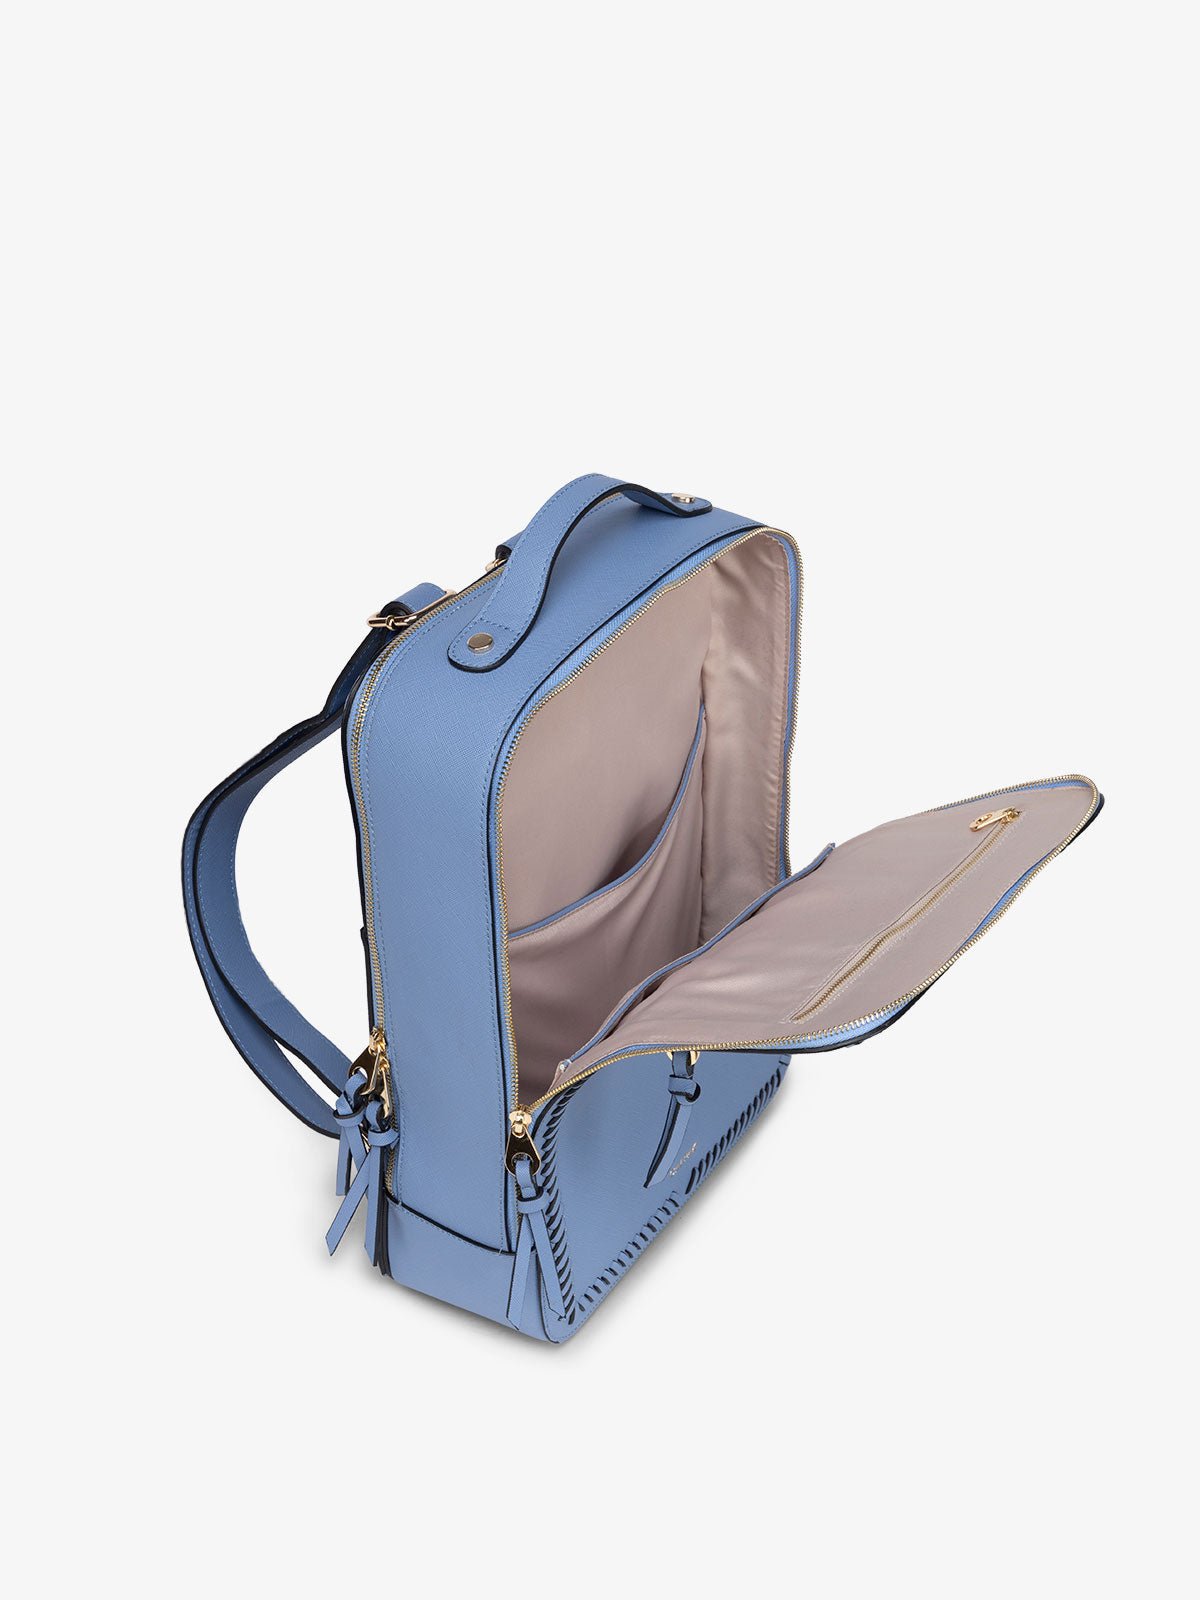 interior of Kaya laptop backpack with compartments